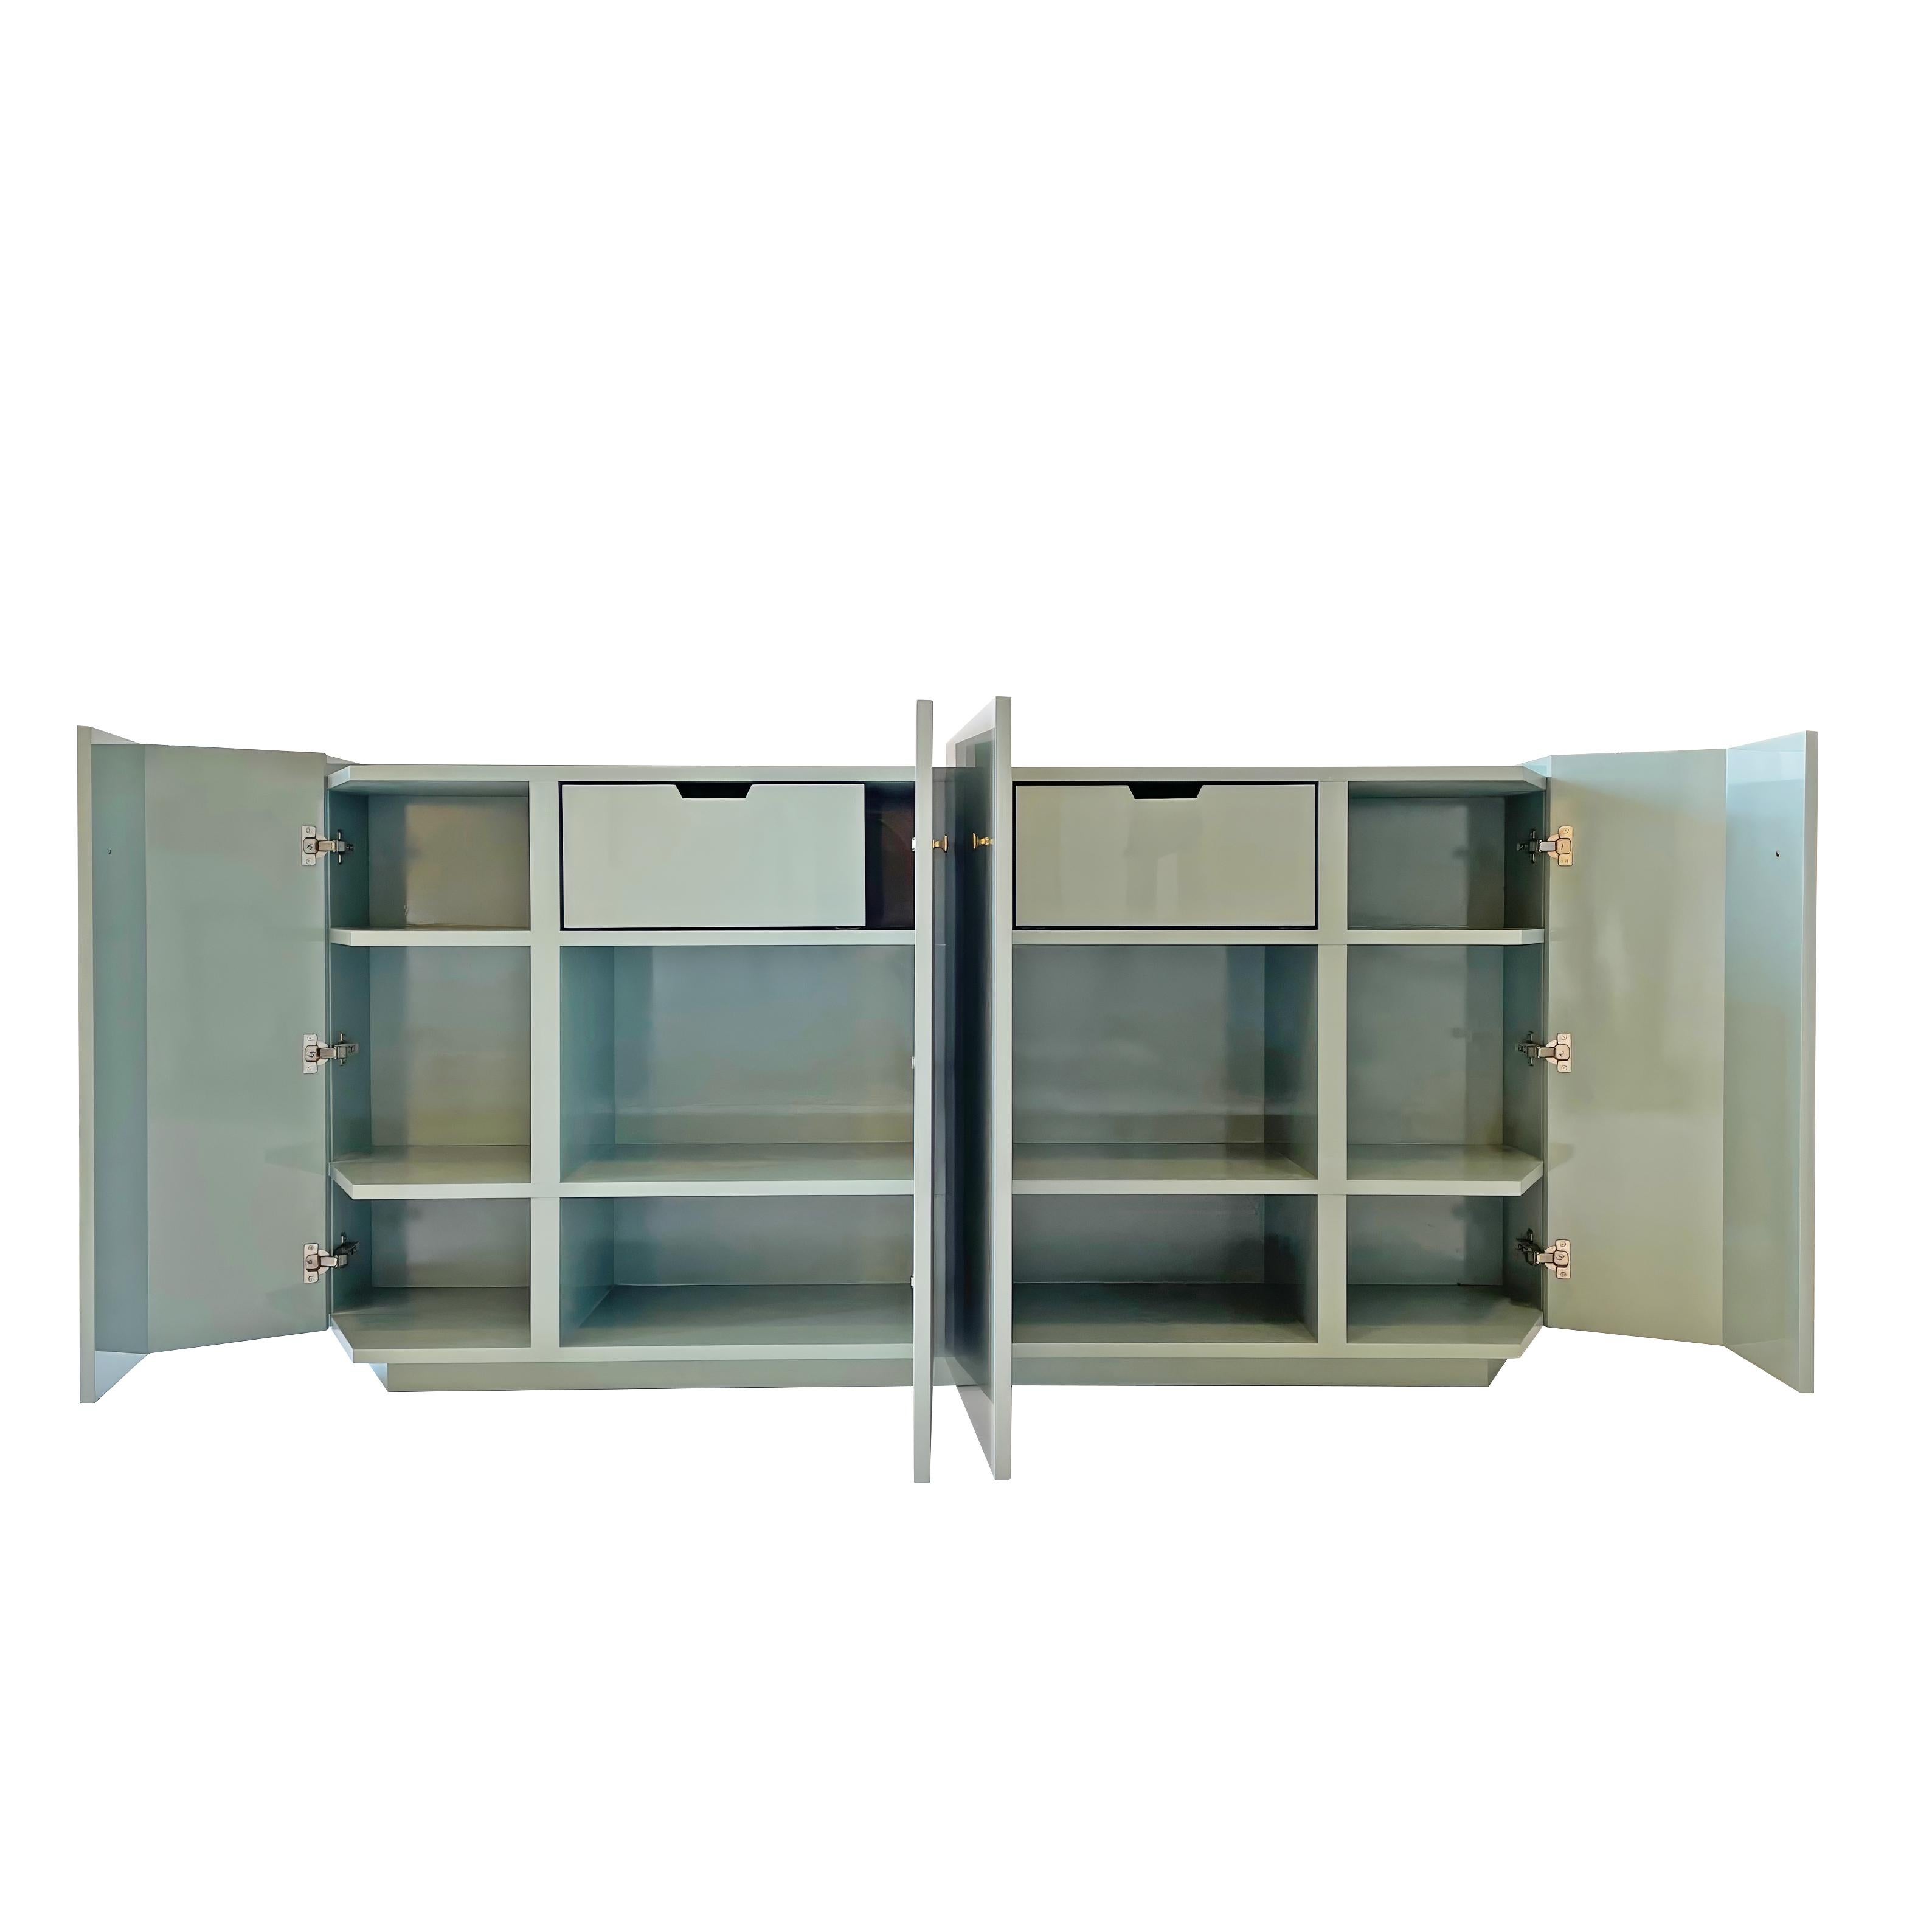 This sleek and highly functional sideboard offers soft close drawers and multiple shelves. With a high gloss Caribbean Teal lacquered finish, this piece  
maximizes storage while maintaining an upscale and modern aesthetic. All four doors feature